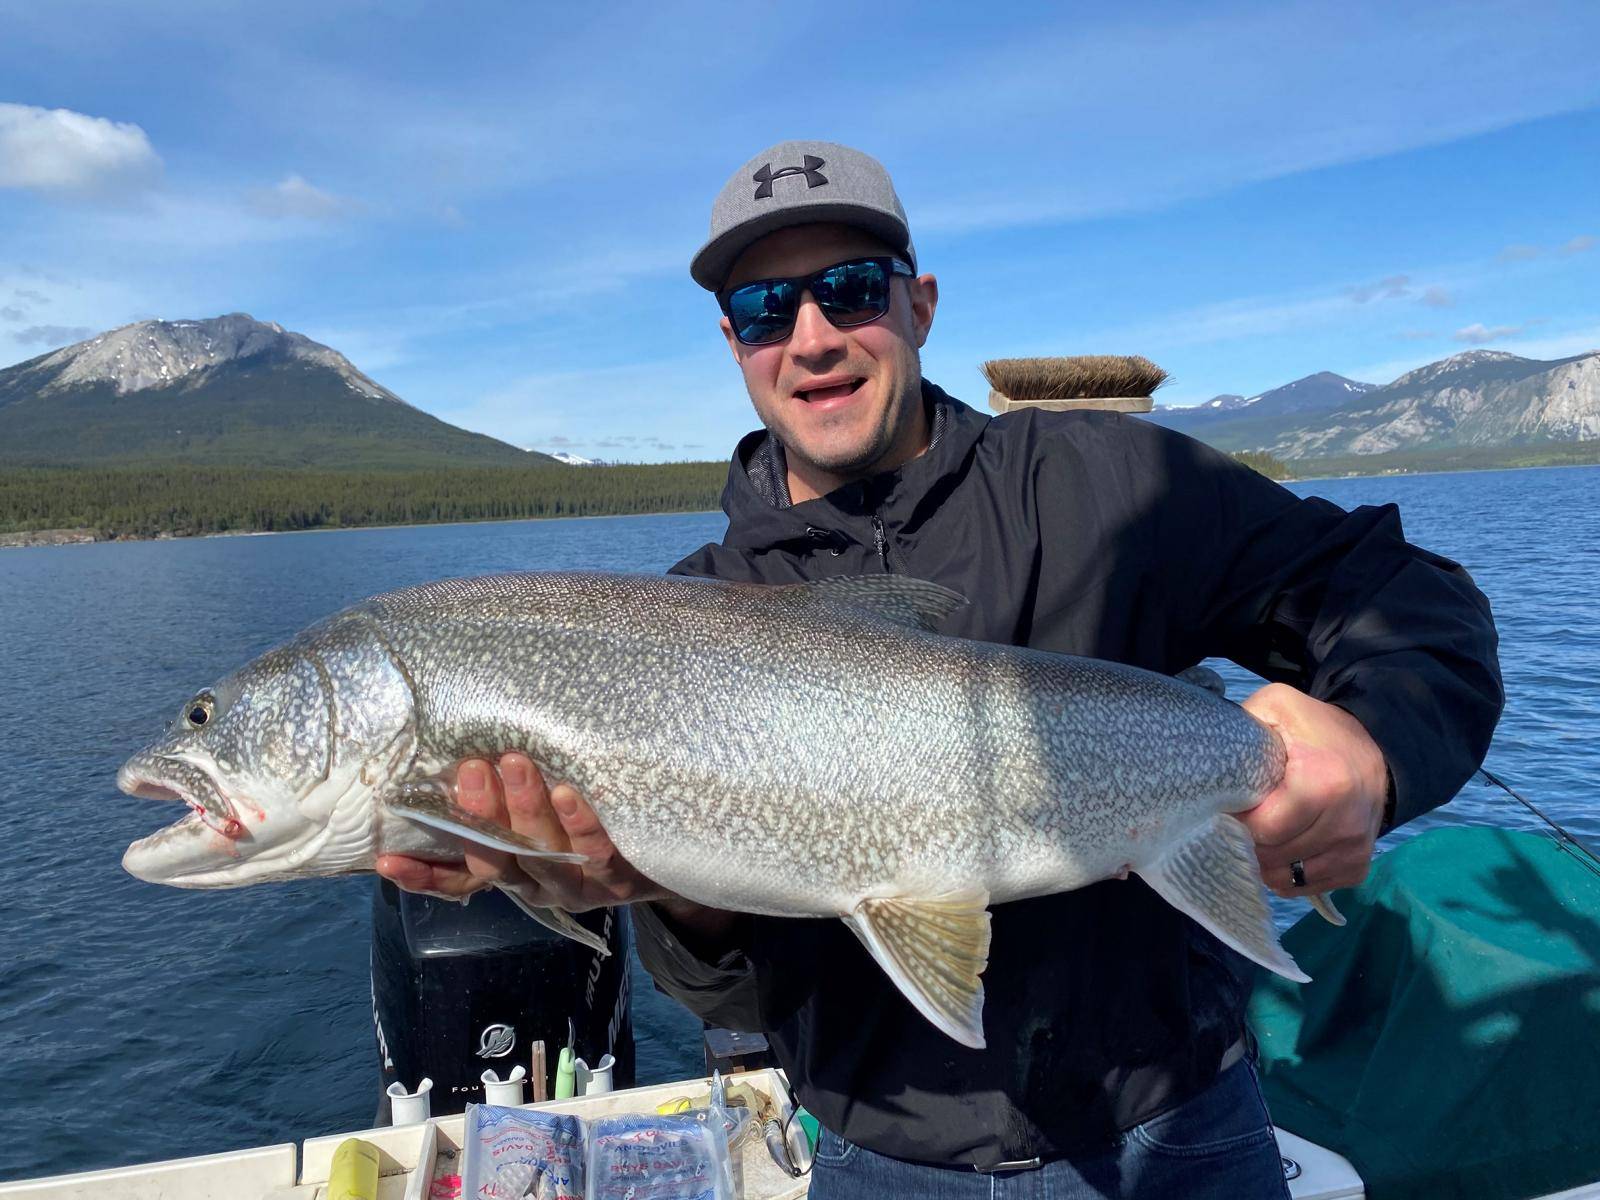 A man on a boat on a lake holding a large caught laketrout